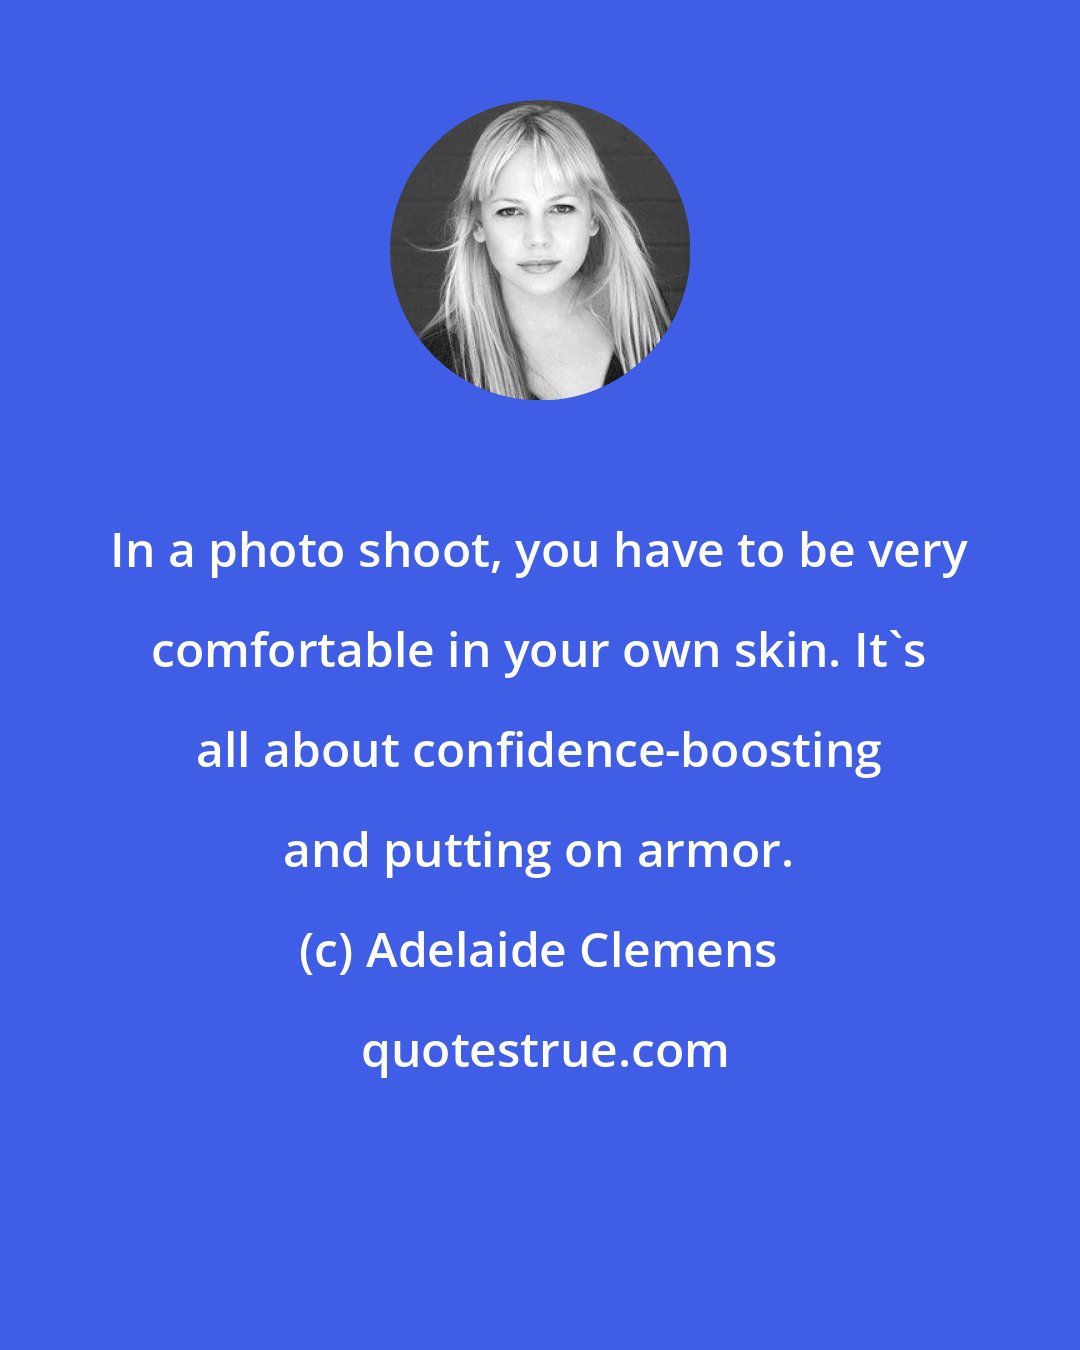 Adelaide Clemens: In a photo shoot, you have to be very comfortable in your own skin. It's all about confidence-boosting and putting on armor.